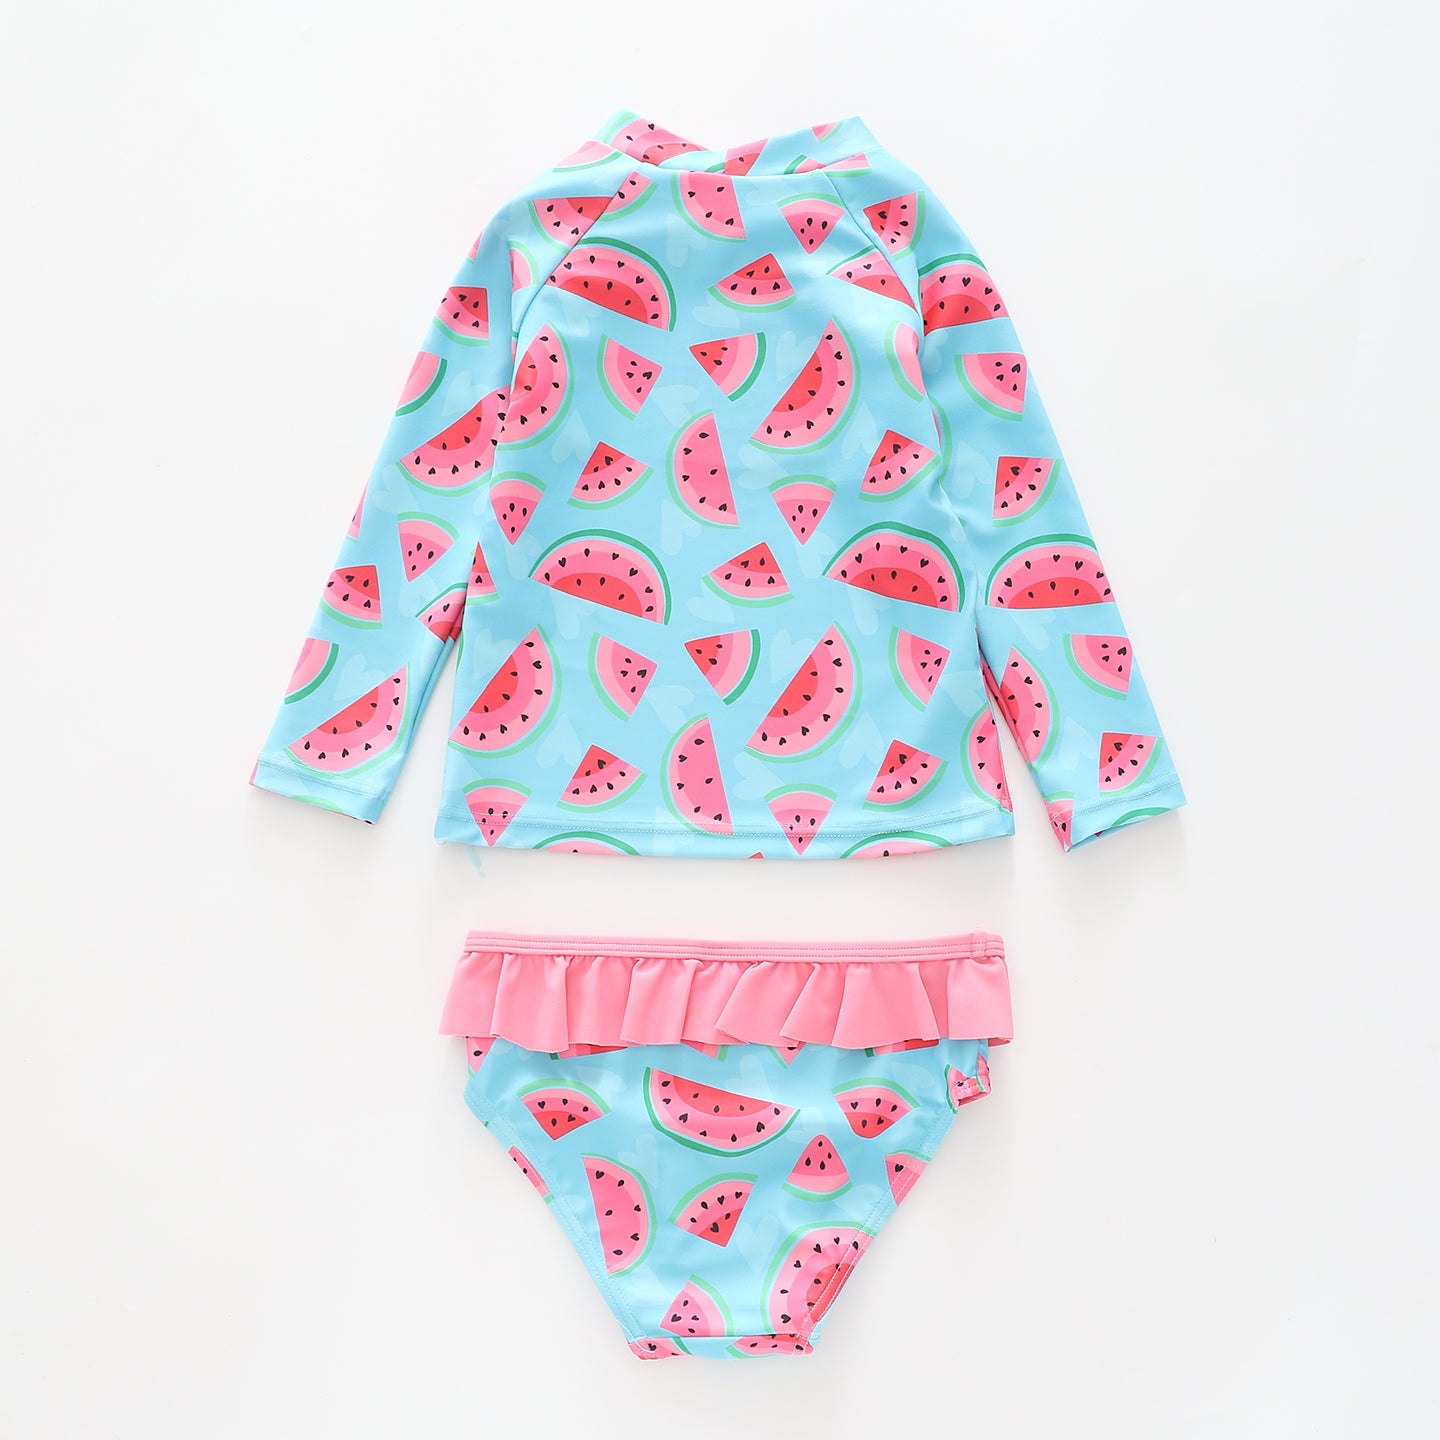 Girl's Pink and Blue Watermelon Print Two Piece Swimsuit Set